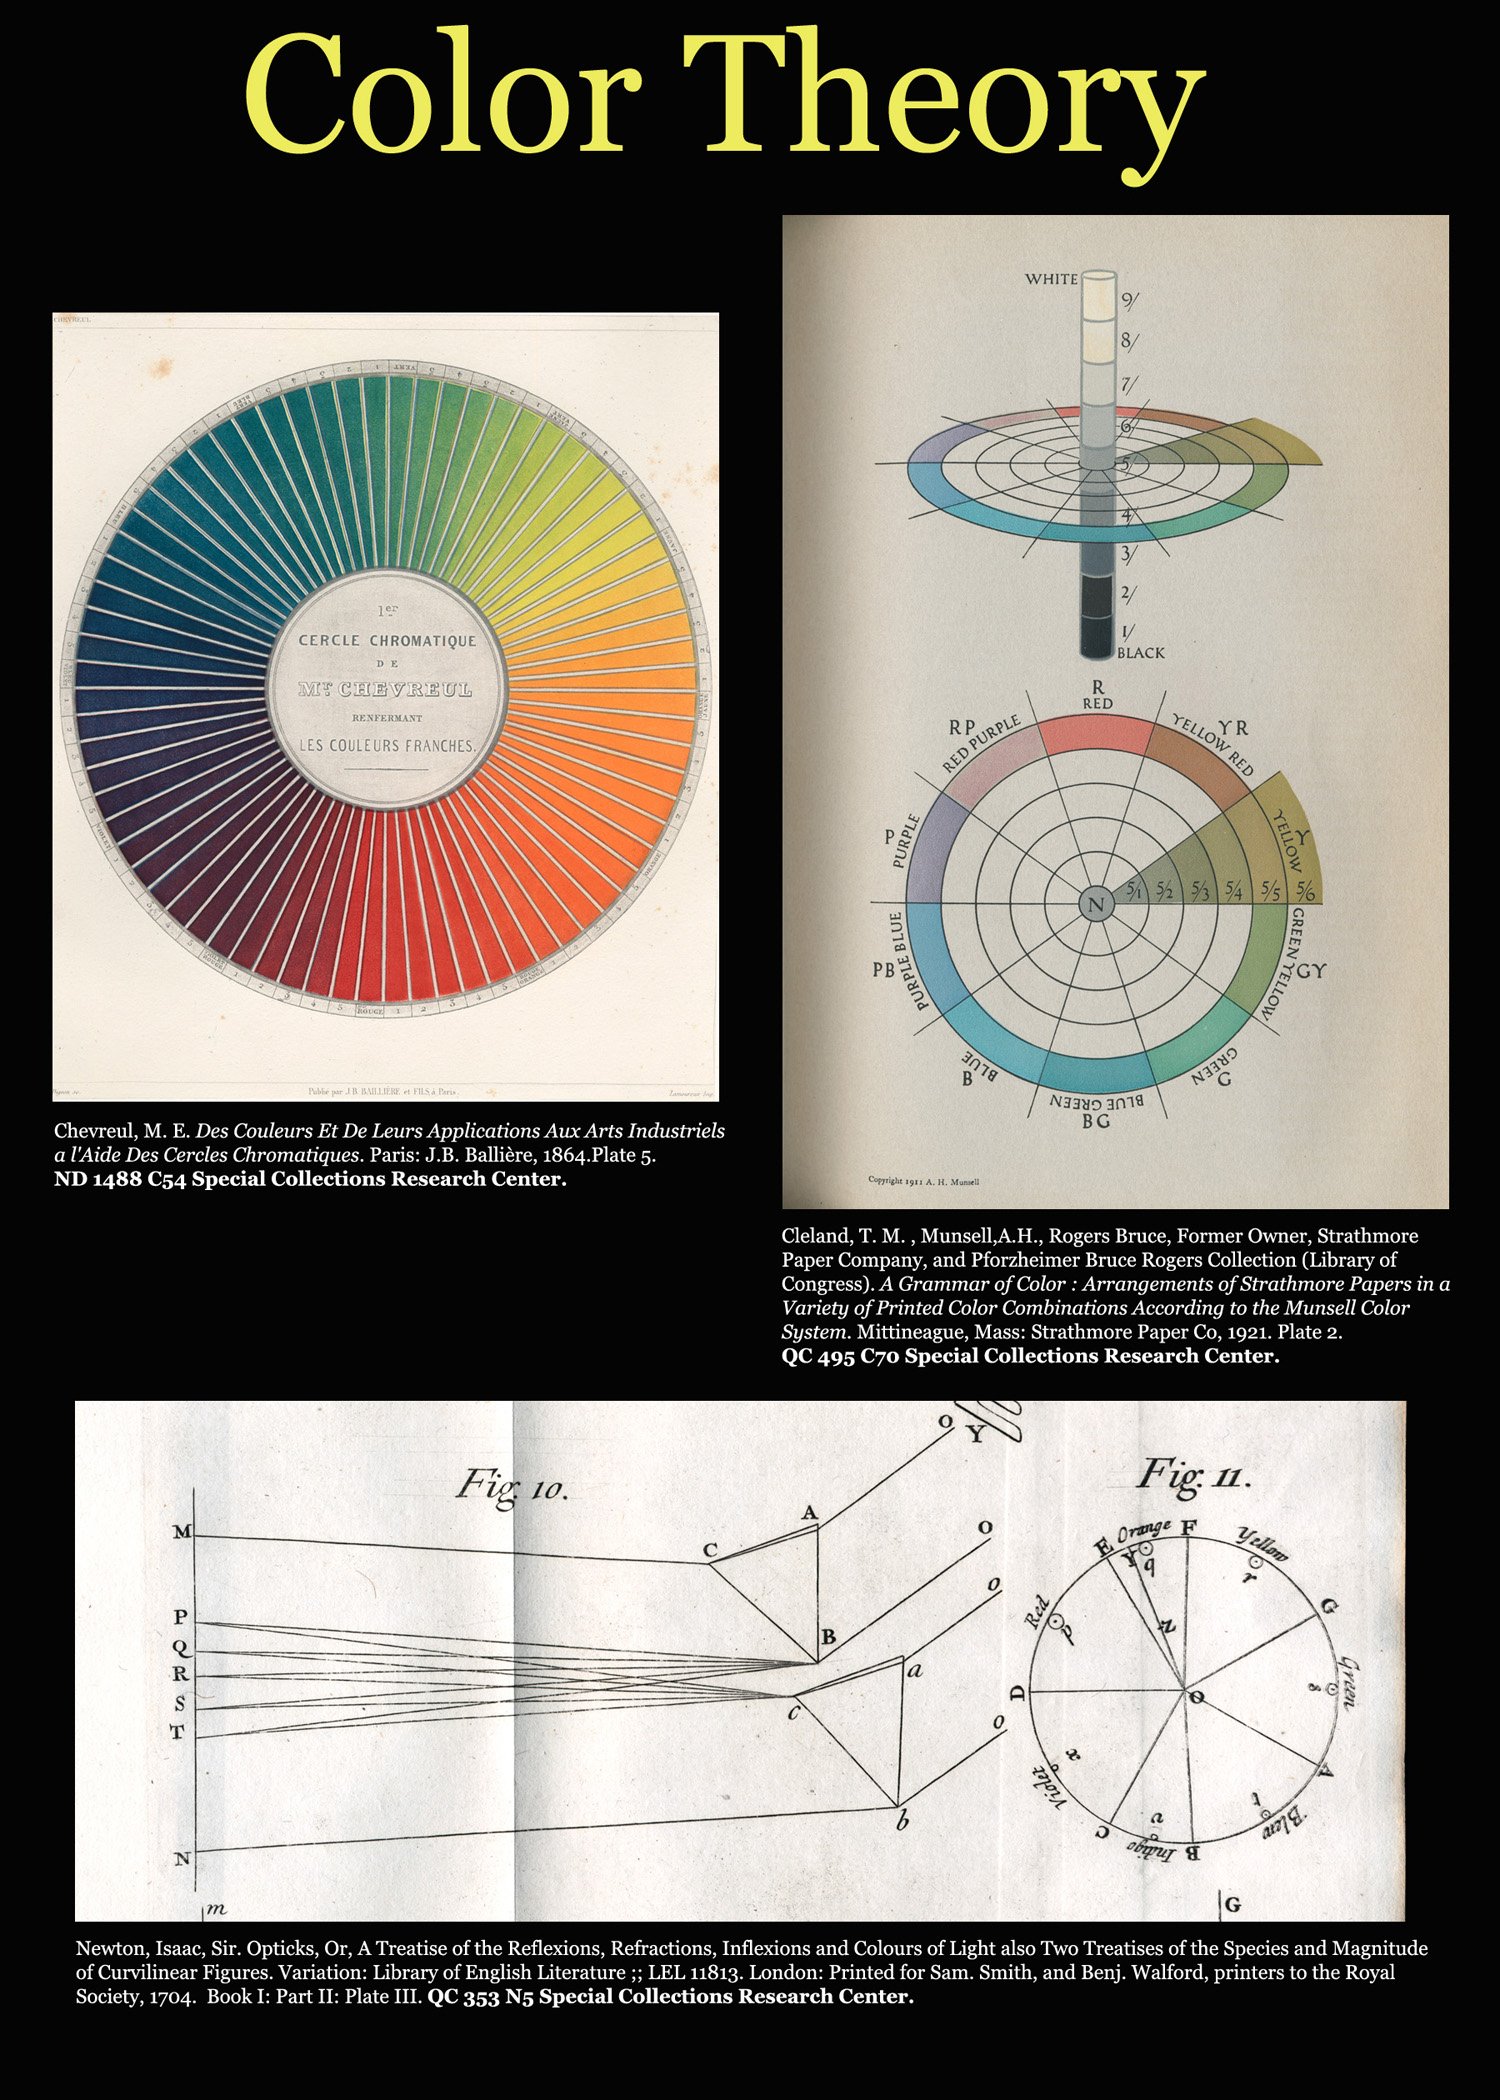 Color Theory - The Origins of Color - The University of Chicago Library